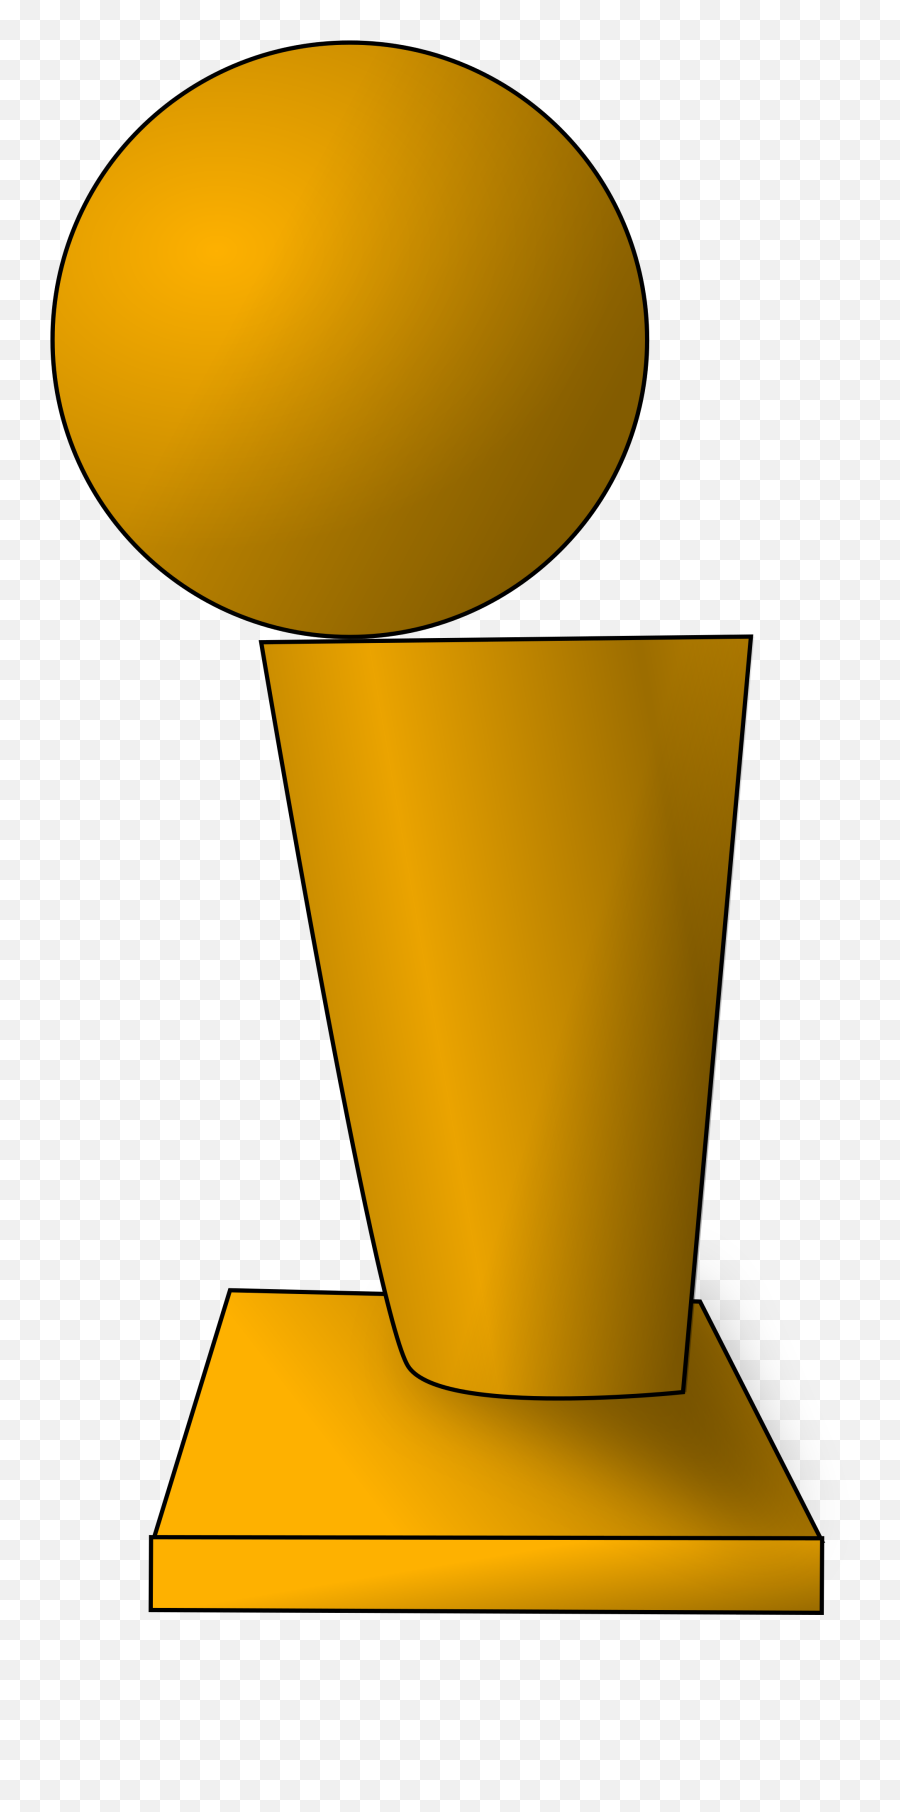 Nba Championship Trophy Png Image - Larry O Brien Trophy Drawing